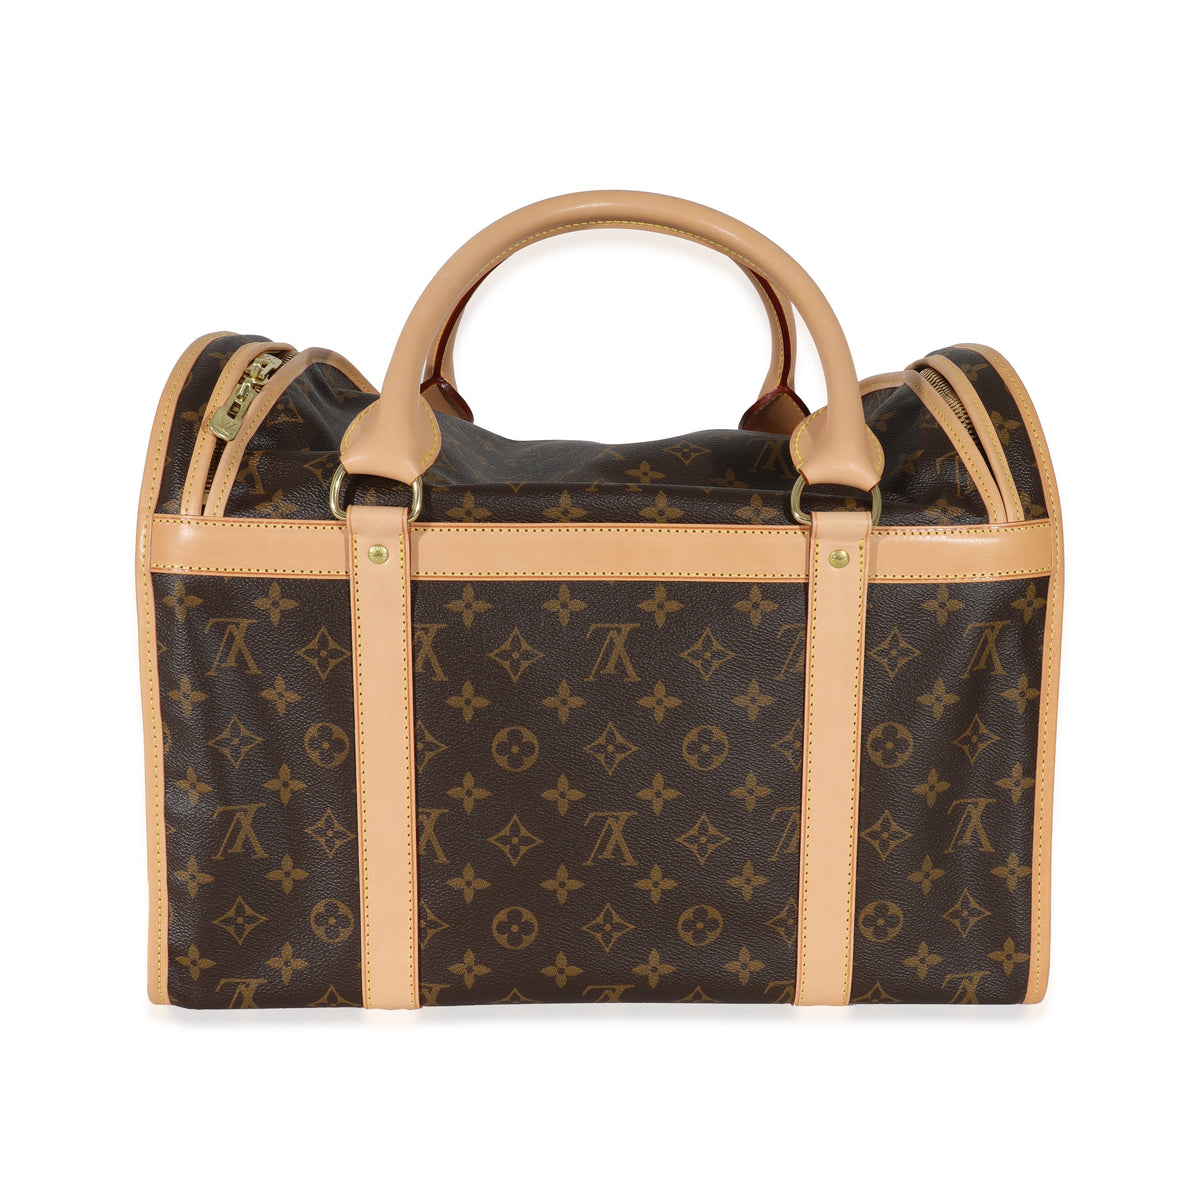 Louis Vuitton Dog bag in Monogram canvas and leather Dark brown